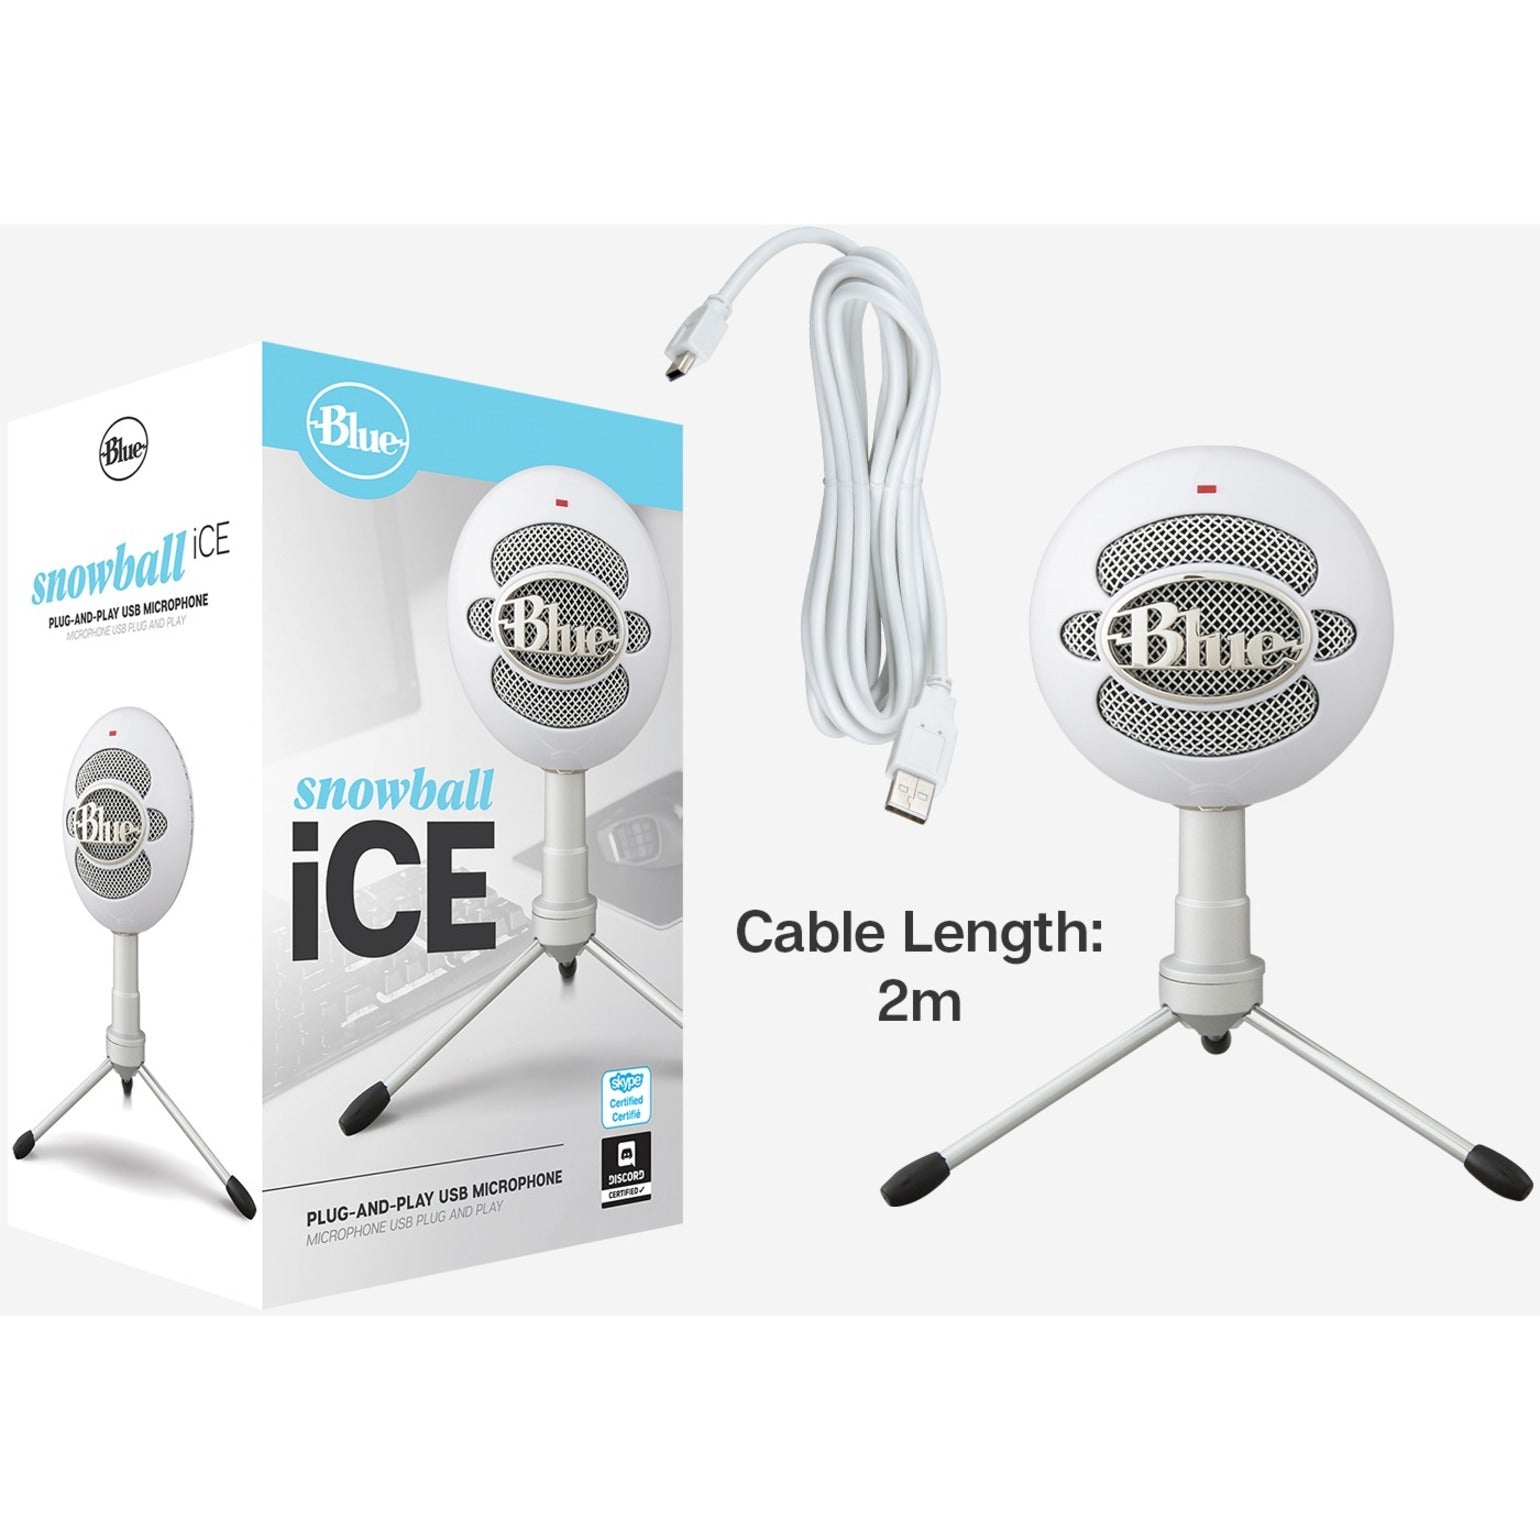 Blue 988-000070 Snowball iCE Plug and Play USB Microphone, Cardioid Condenser, Stand Mountable